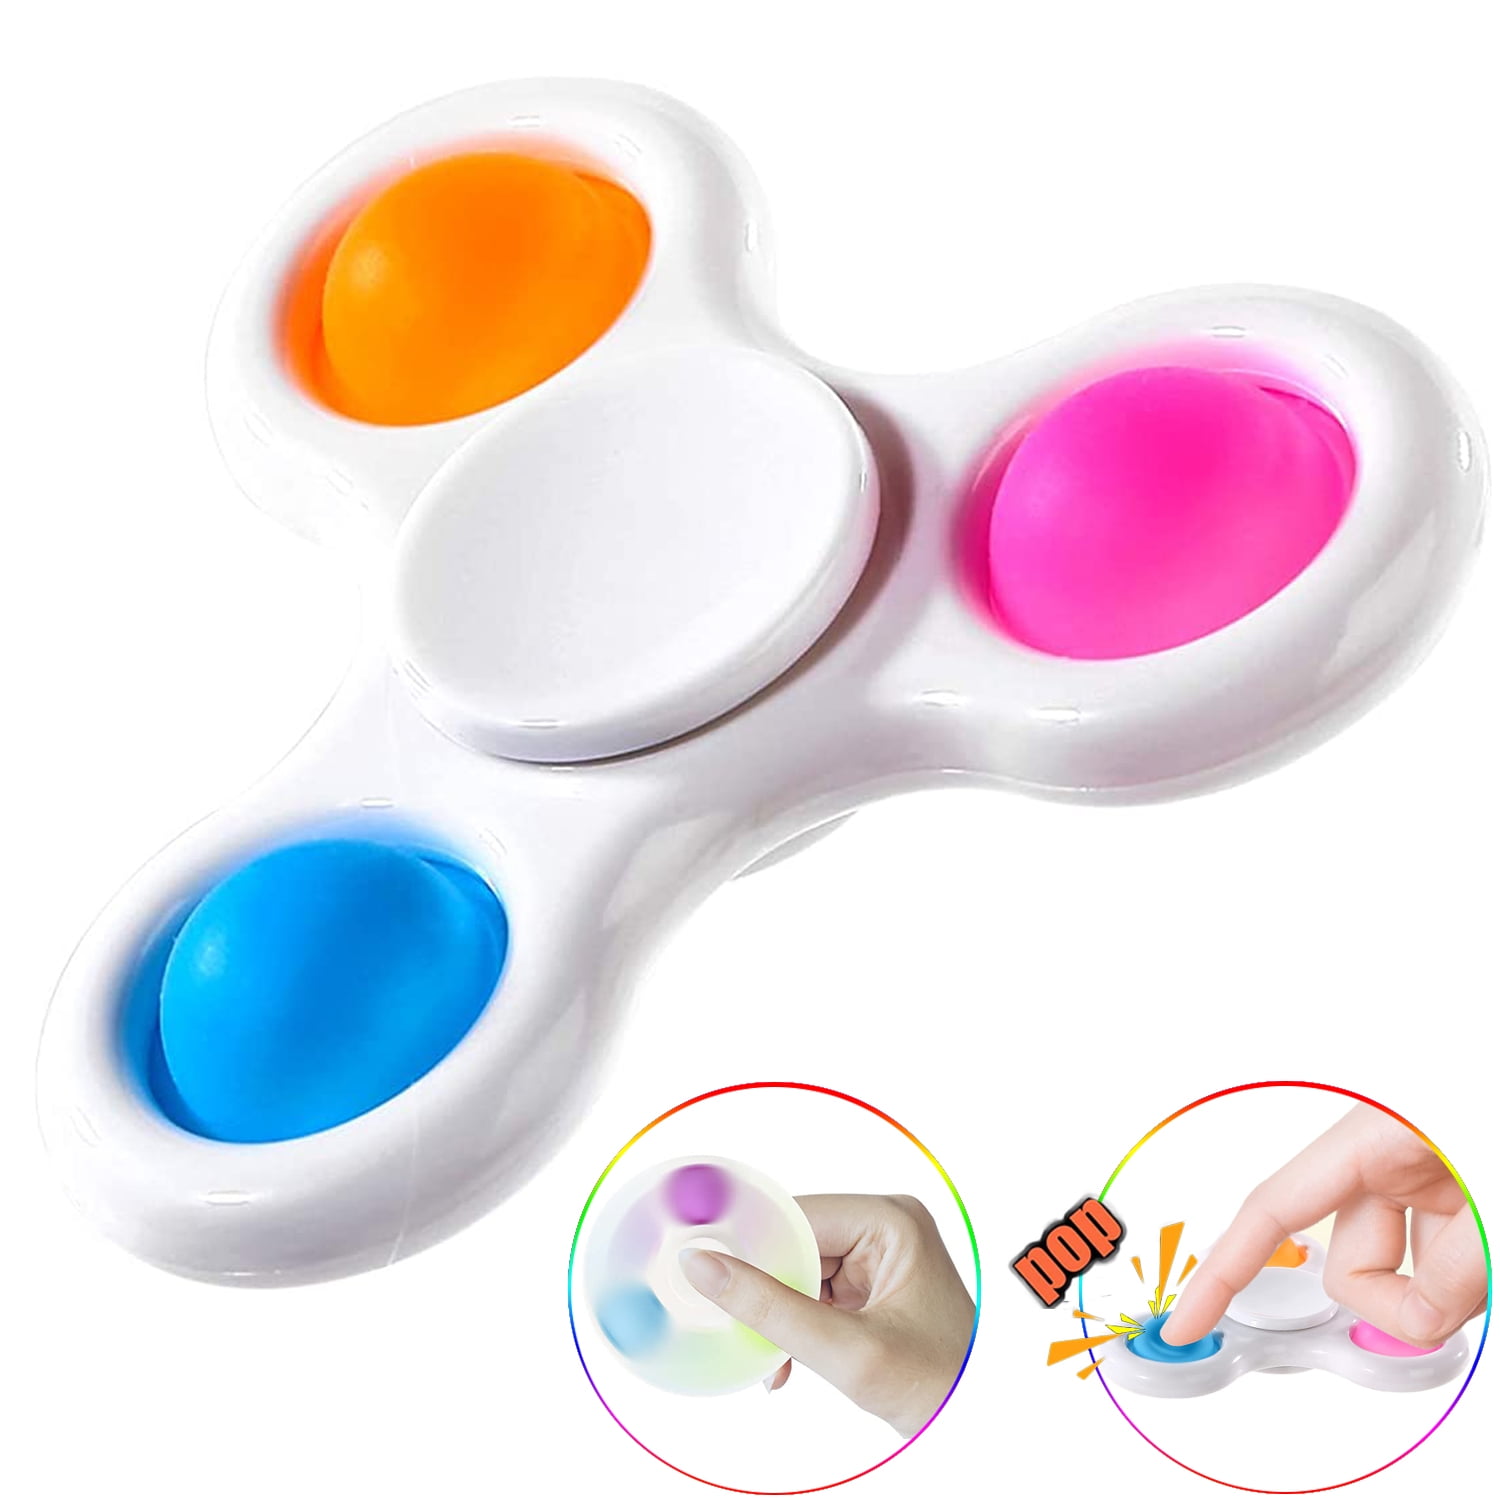 Baby Simple Dimple Fidget Toy Silicone Board Sensory Toy Autism Stress Relief DE 